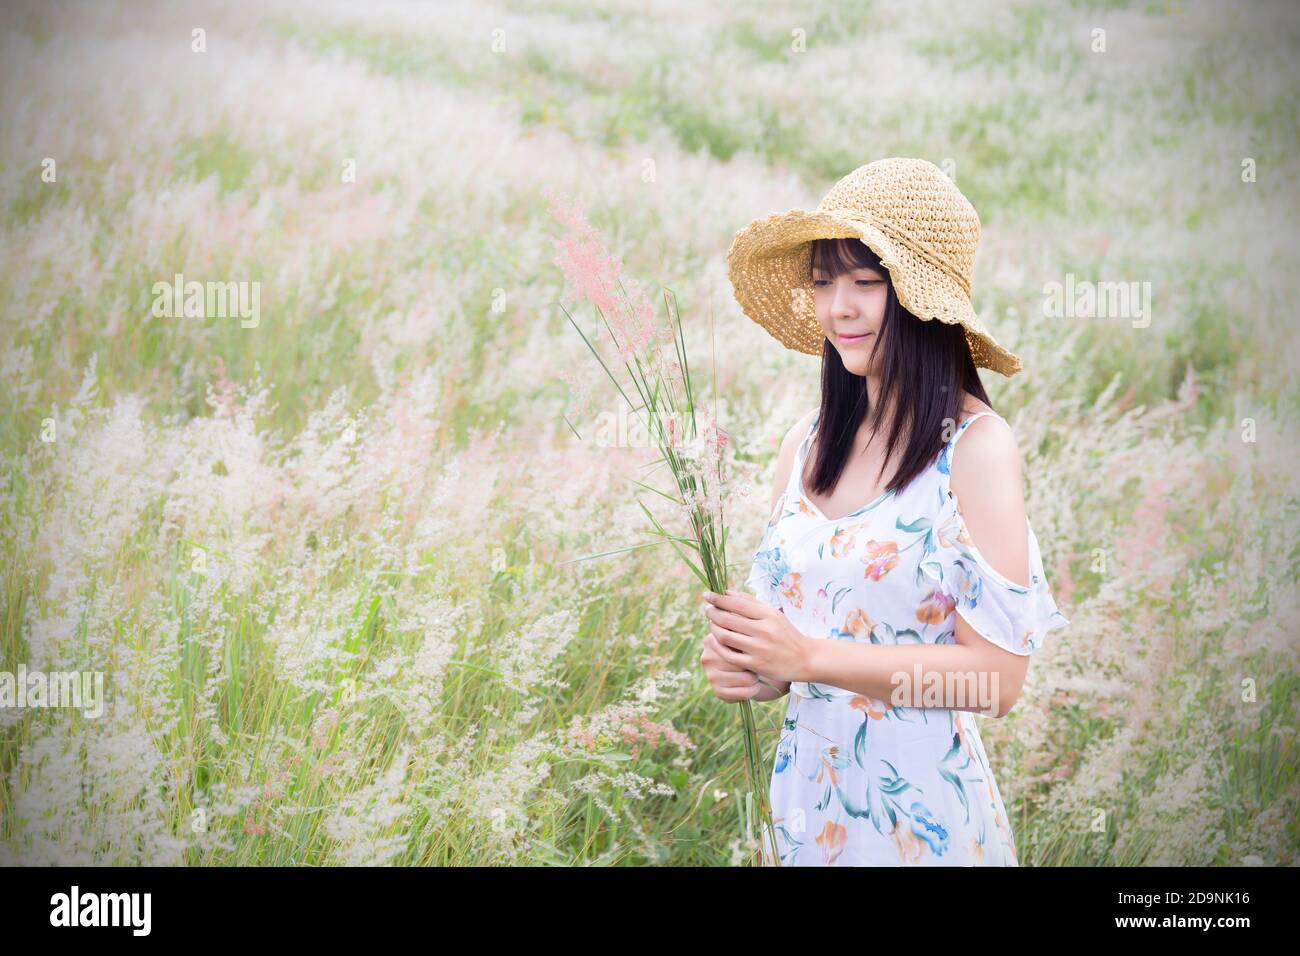 The girl wearing a hat, wearing a white dress, standing in the middle of the grass with beautiful white flowers with a relaxed and happy mood. Gray fr Stock Photo